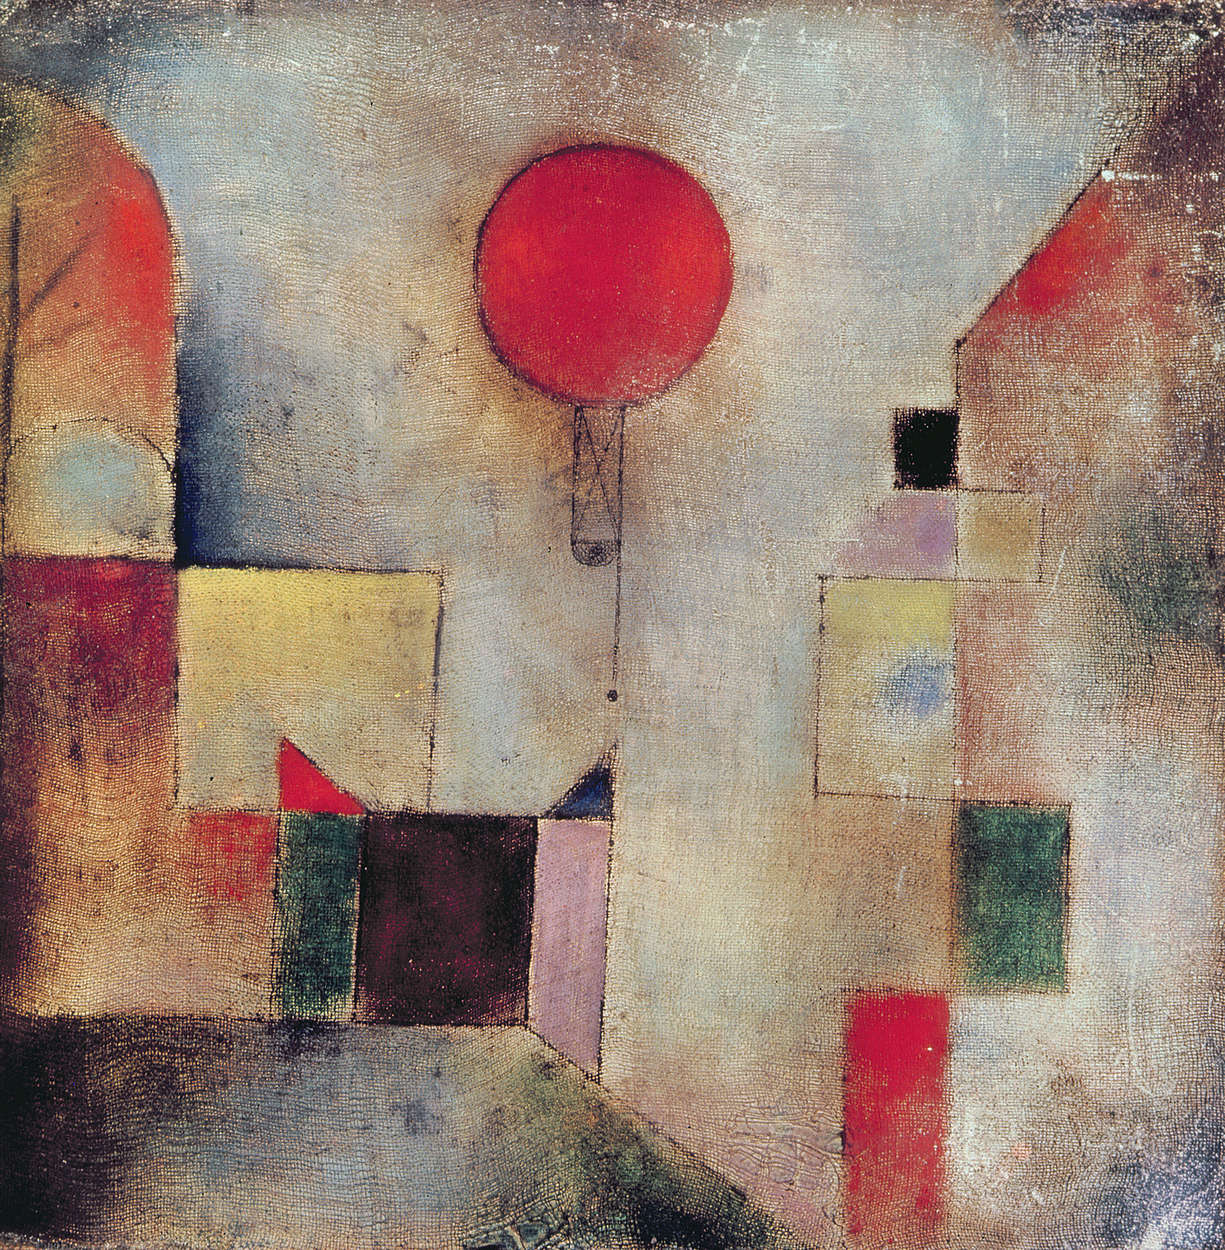             Photo wallpaper "Red balloon" by Paul Klee
        